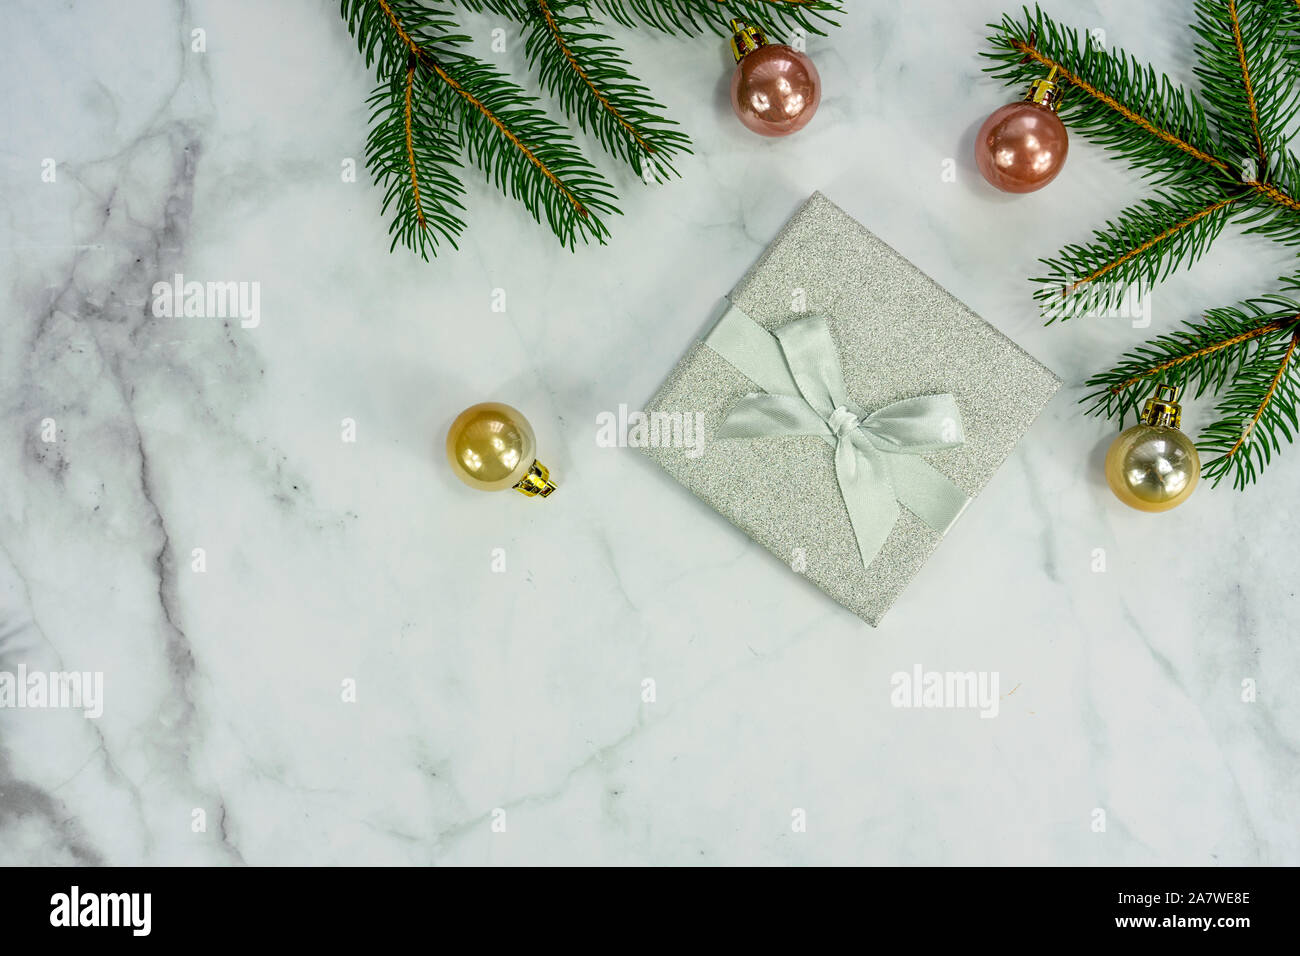 Christmas frame background on marbel with silver decoration ornaments and gift box . Stock Photo